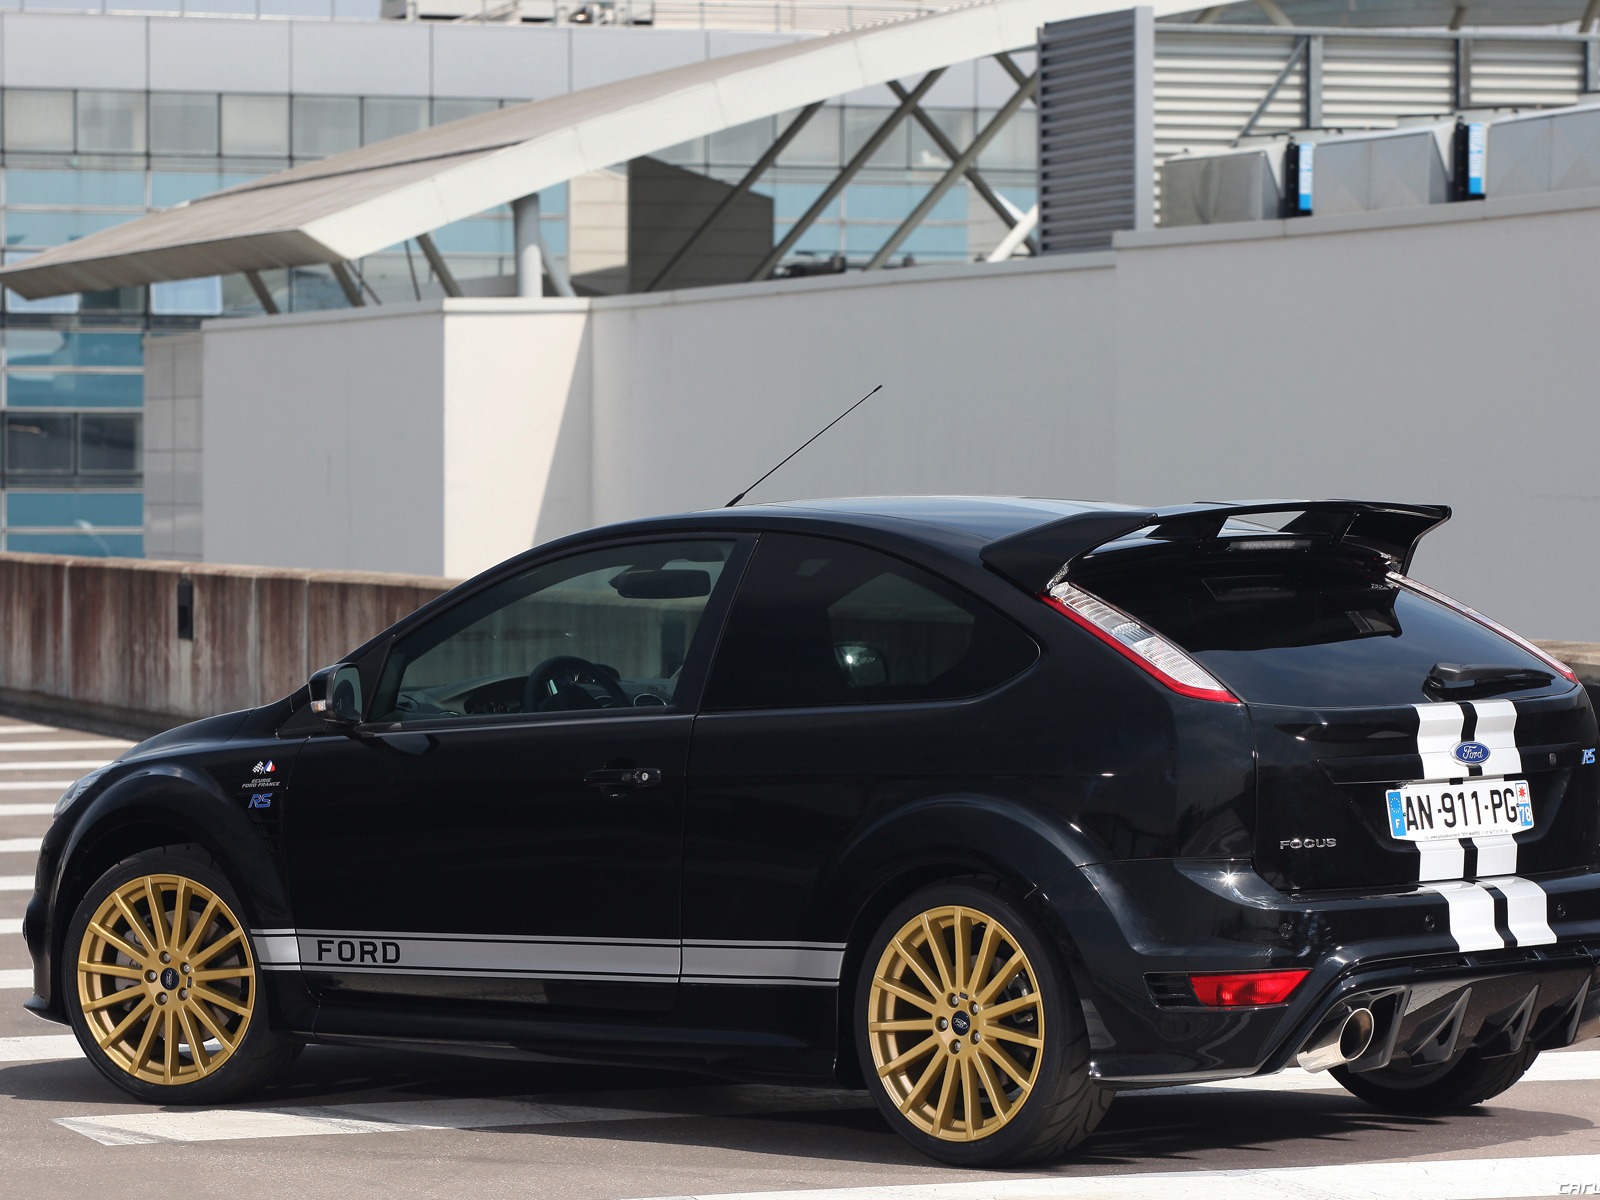 Ford Focus RS Le Mans Classic - 2010 福特3 - 1600x1200